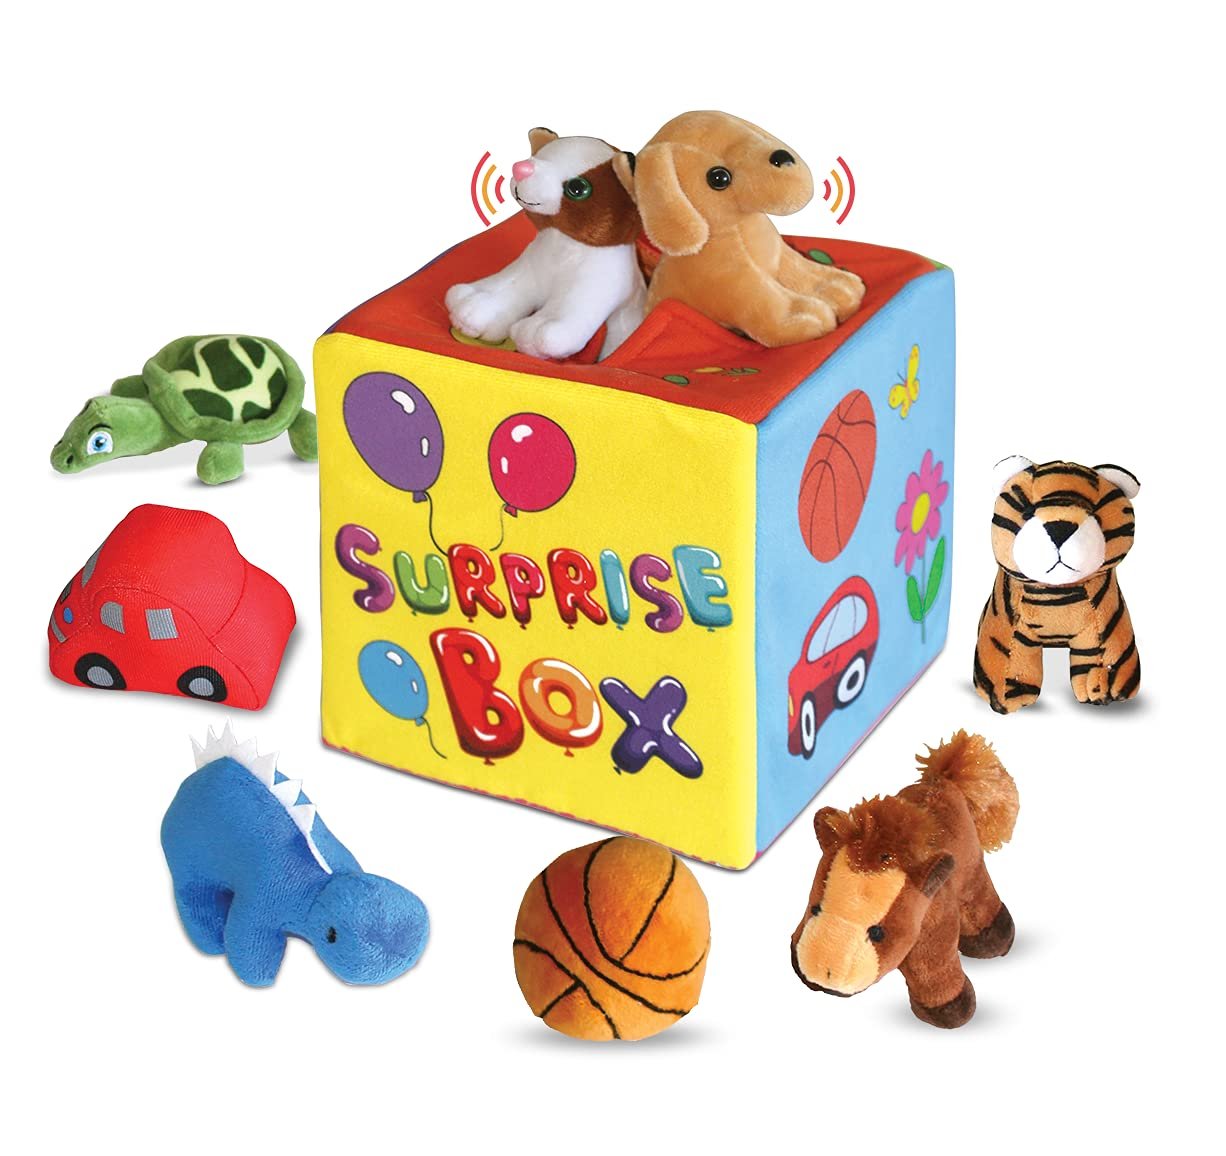 Bundaloo Surprise Box with 8 Plush Toys - Soft Sensory Playset of Stuffed Animals with Sounds for Babies & Toddlers